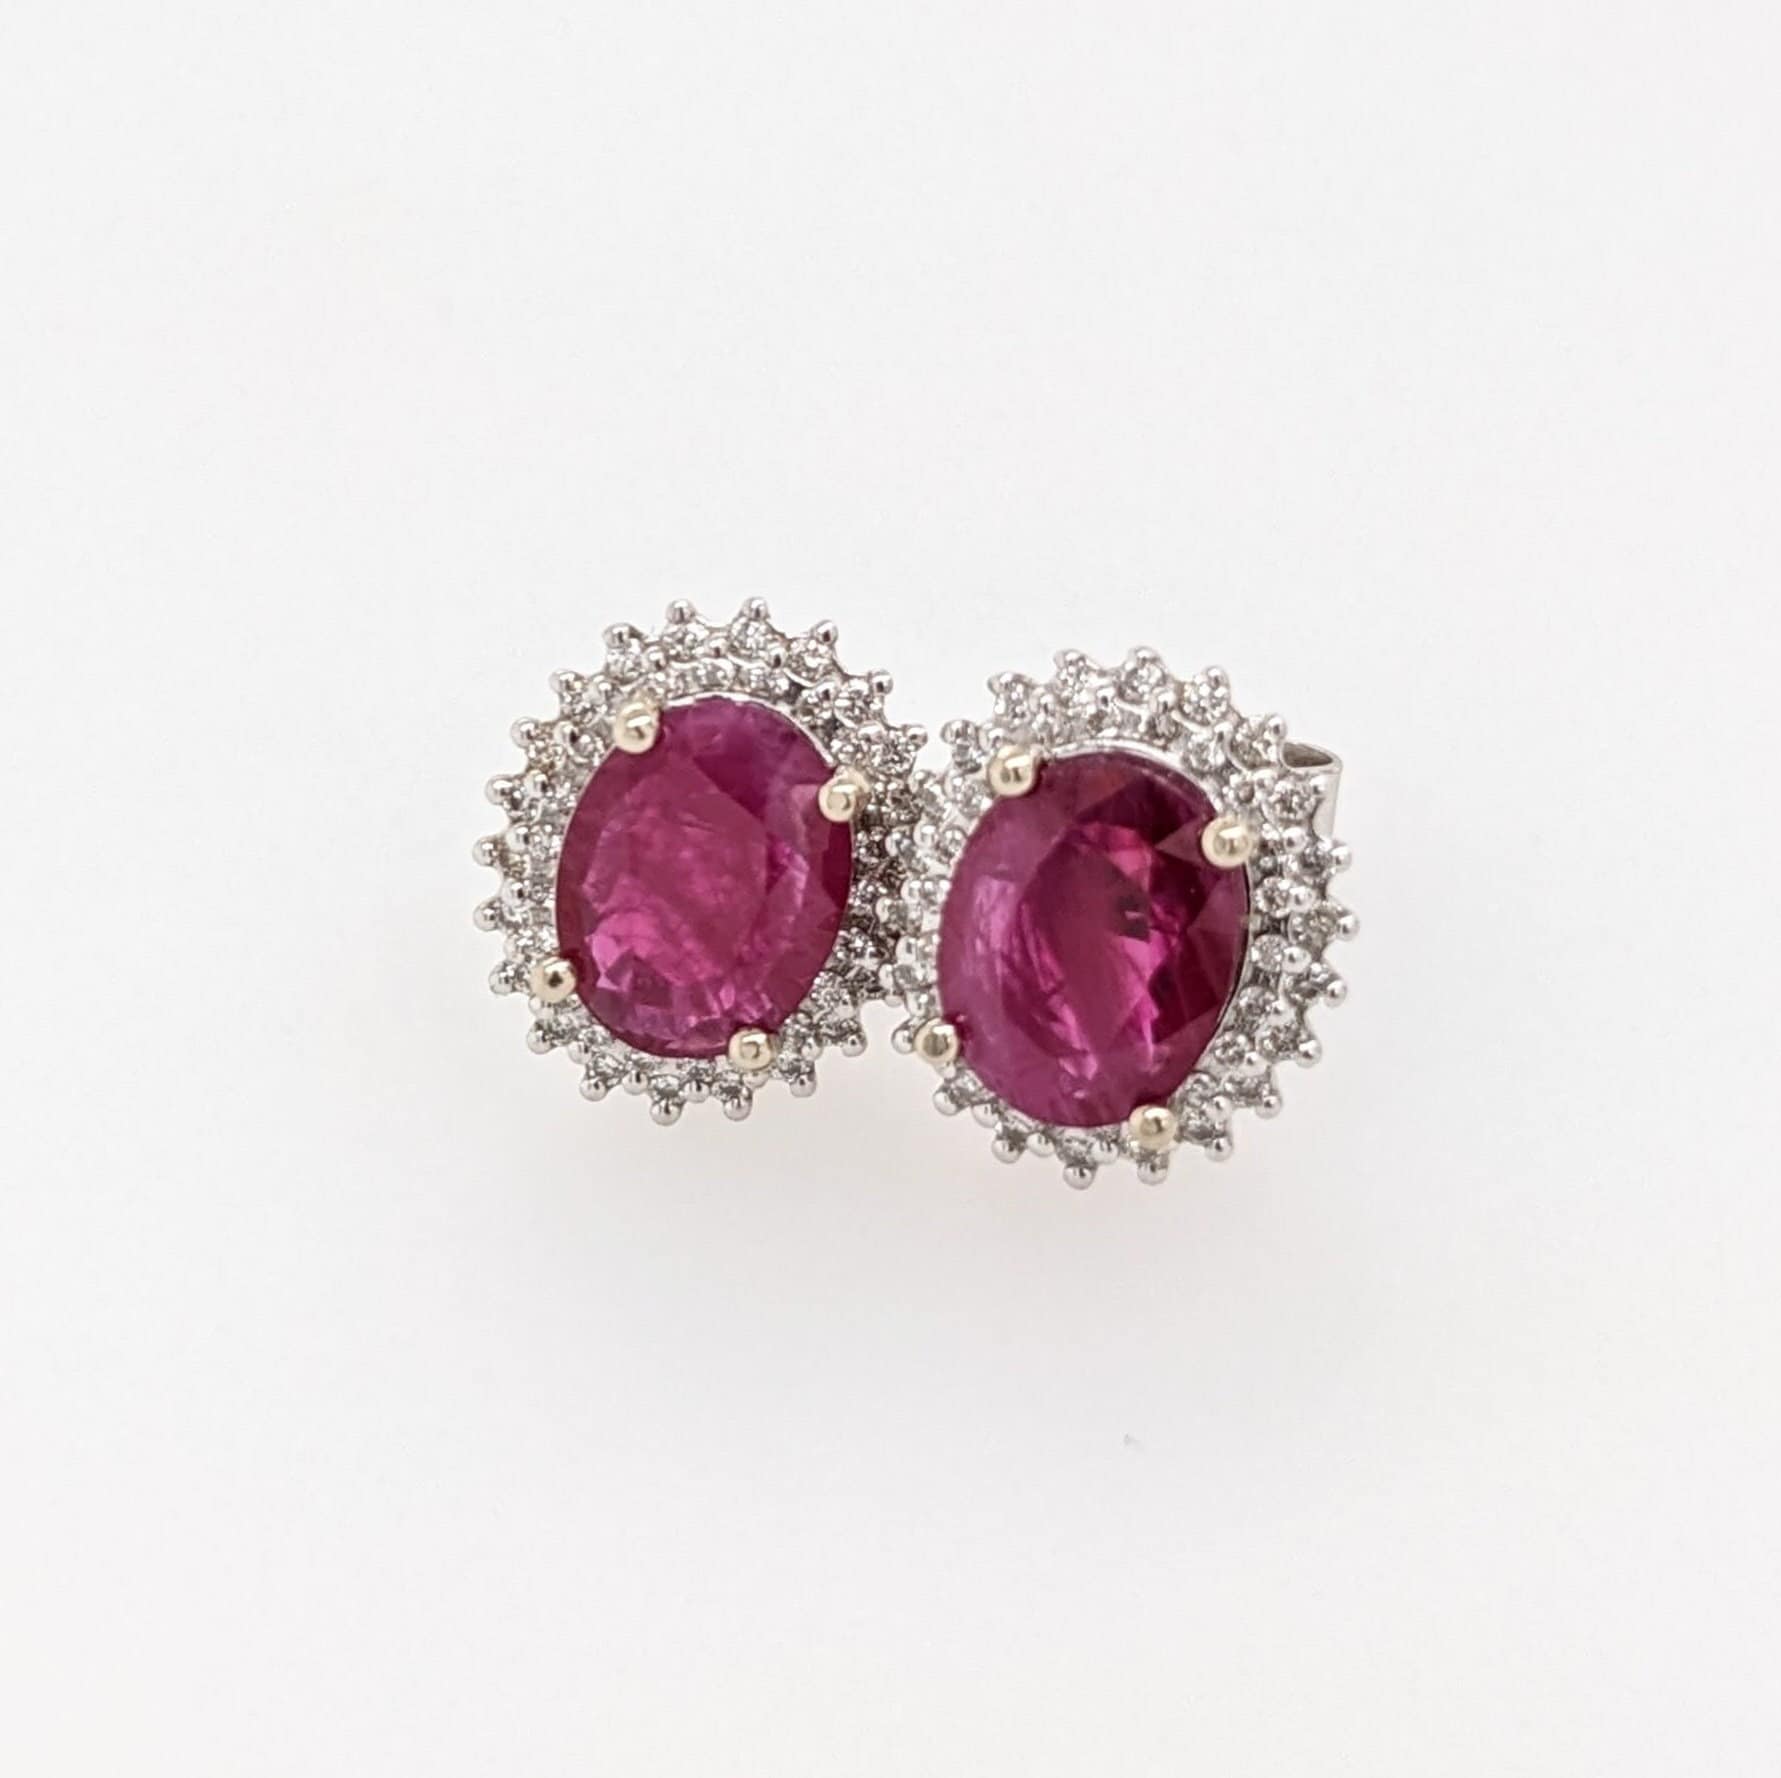 Sunburst Red Ruby Studs in 14k Solid White Gold with Natural Diamond Accents | Oval 9x7mm | July Birthstone | Dainty Studs | Halo |